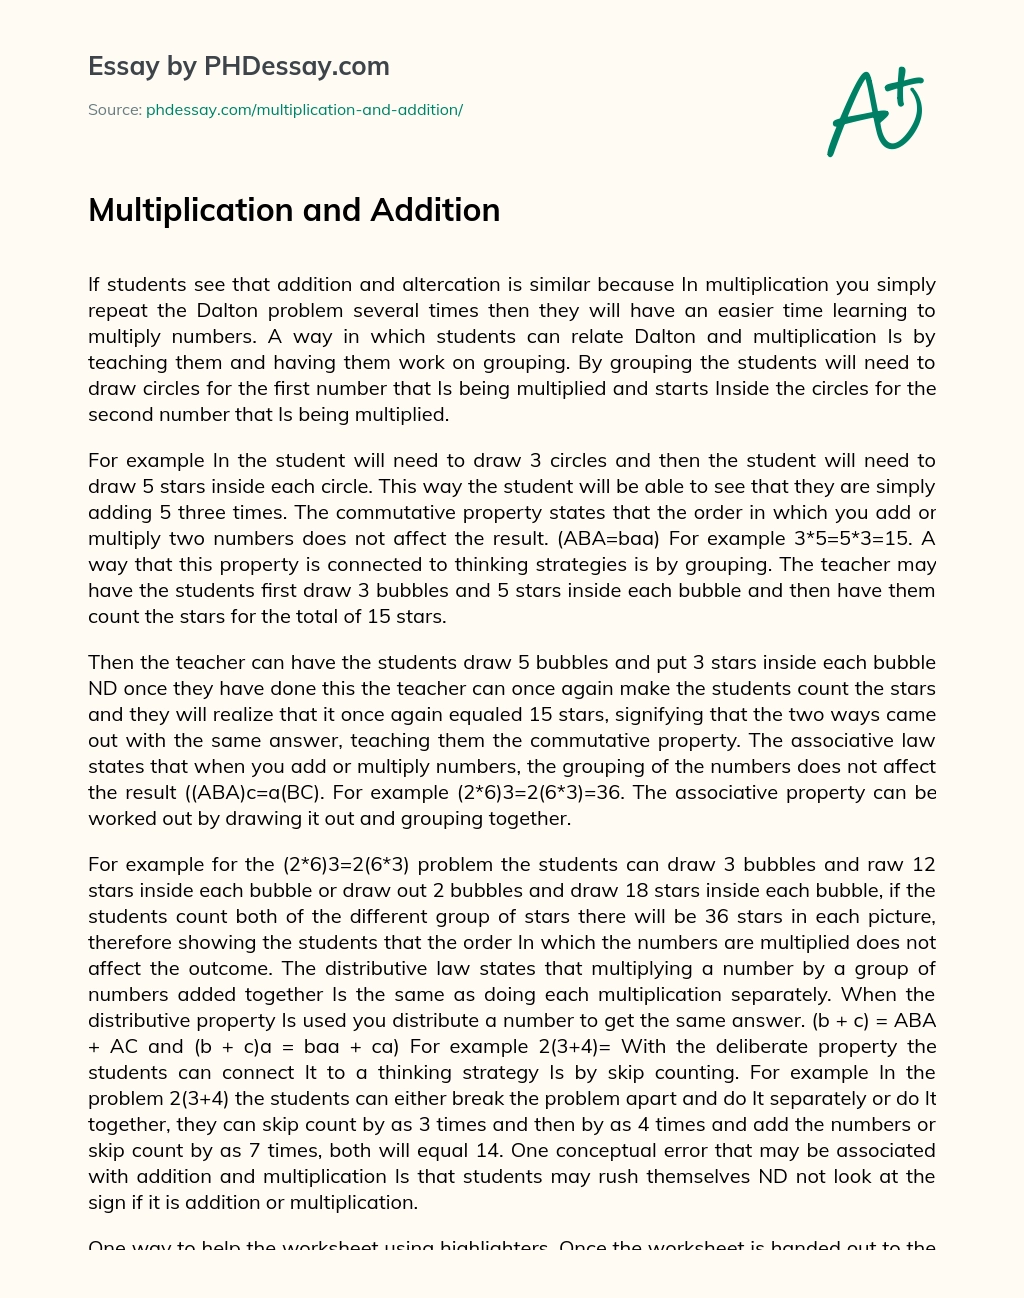 Multiplication and Addition essay